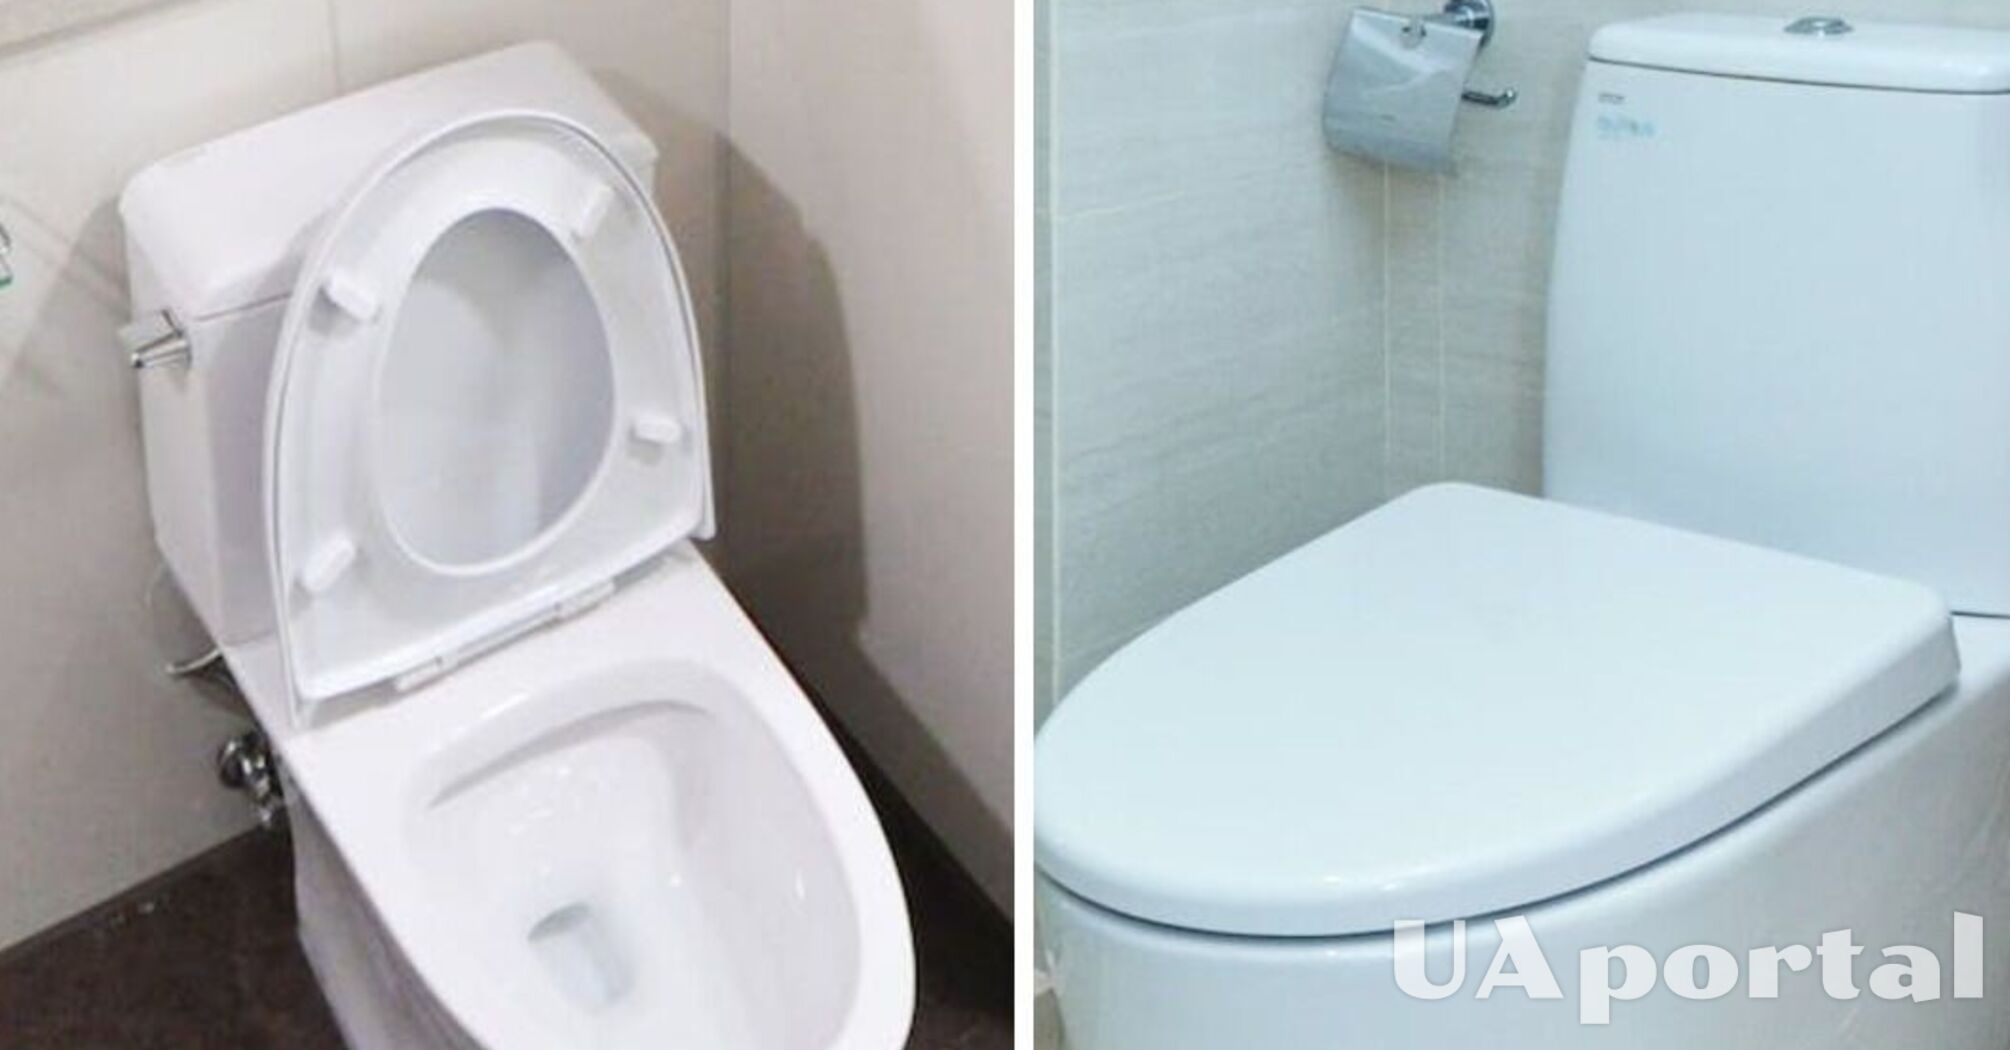 Scientist says whether it is necessary to close the toilet lid when flushing